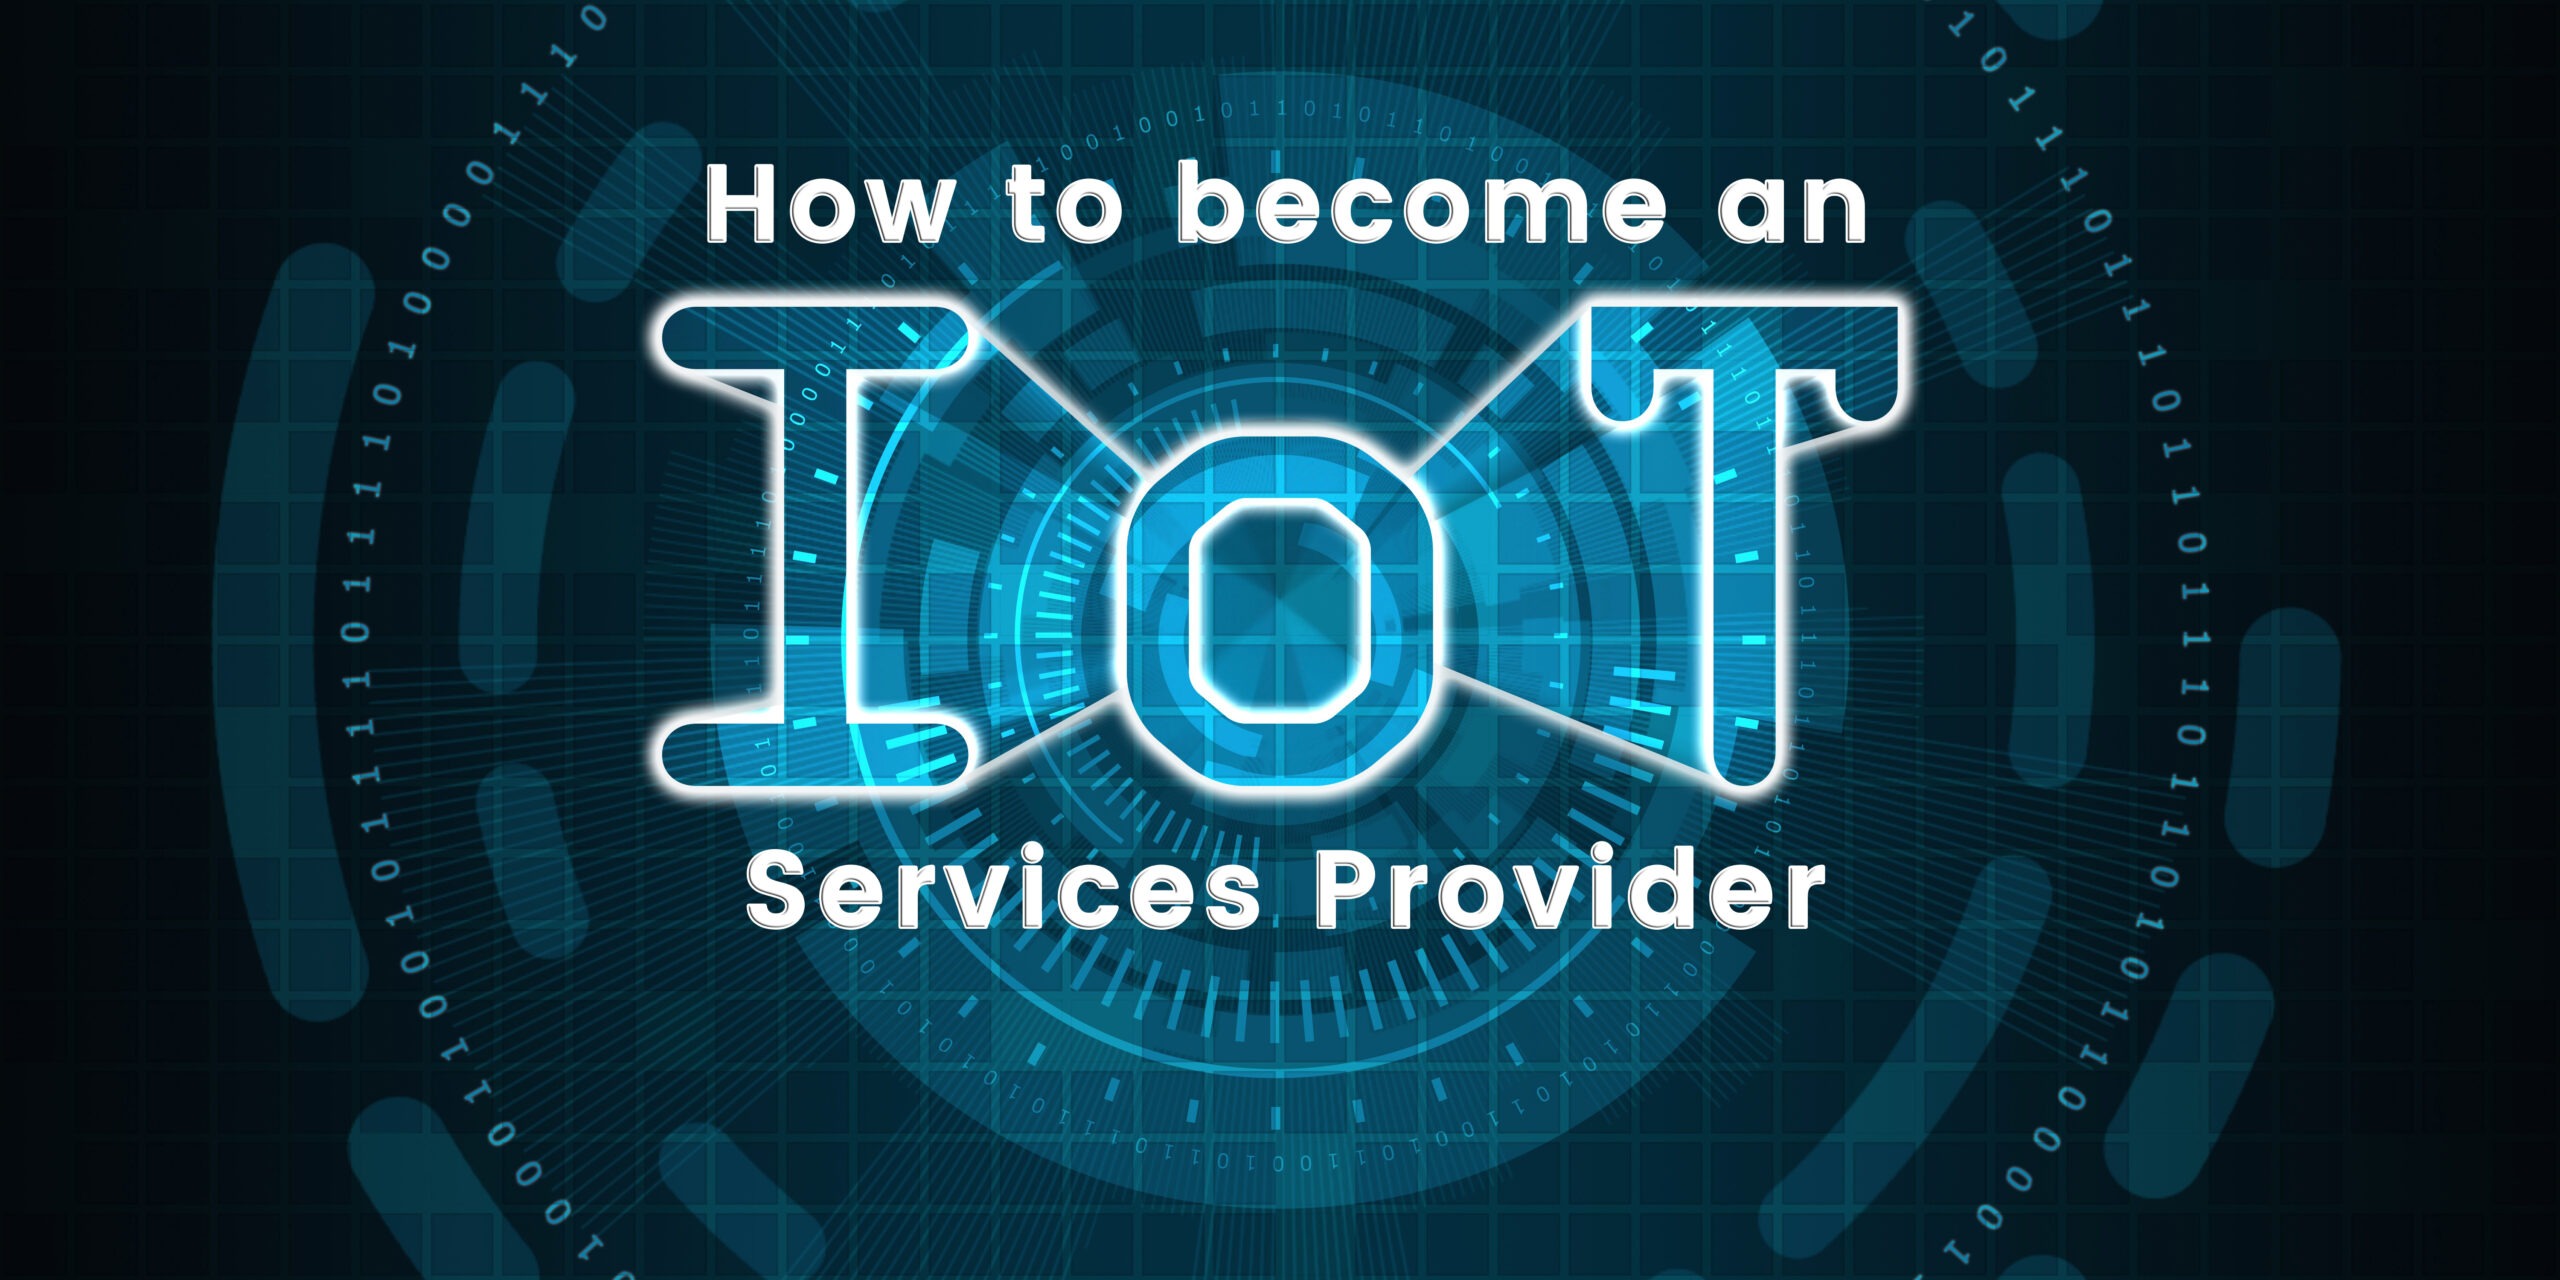 How to Become an IoT Services Provider